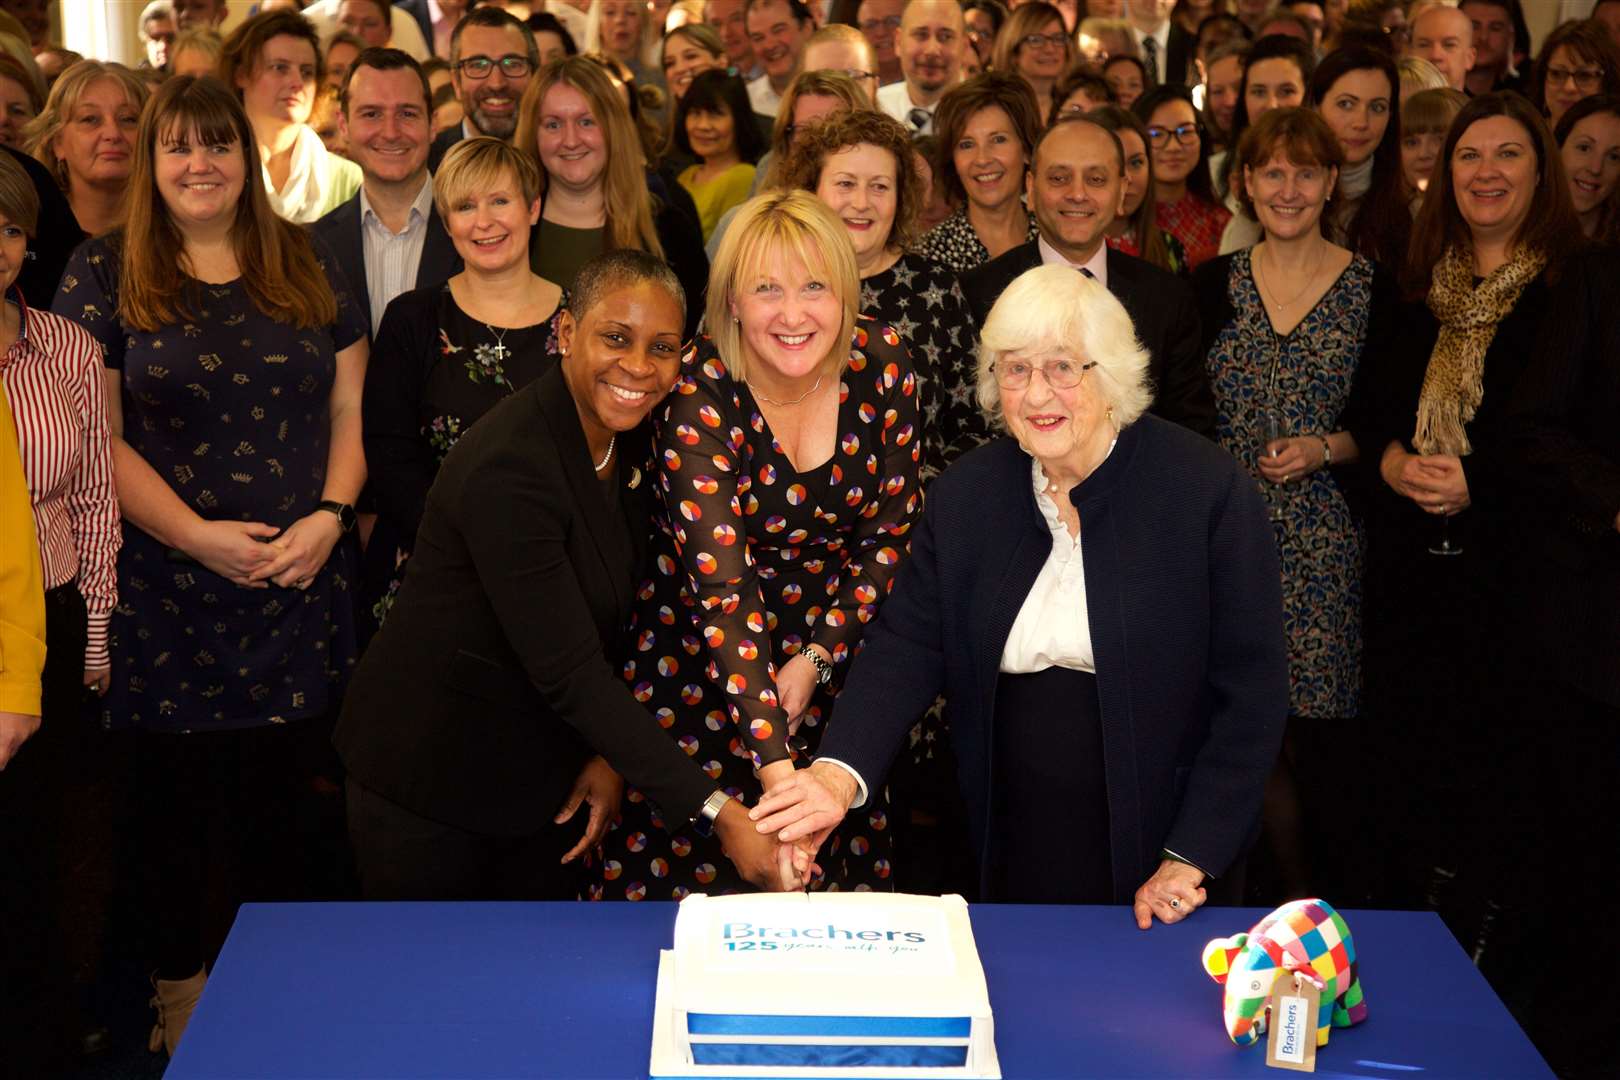 Joanna Worby, centre, joined by staff to mark law firm's 125th anniversary